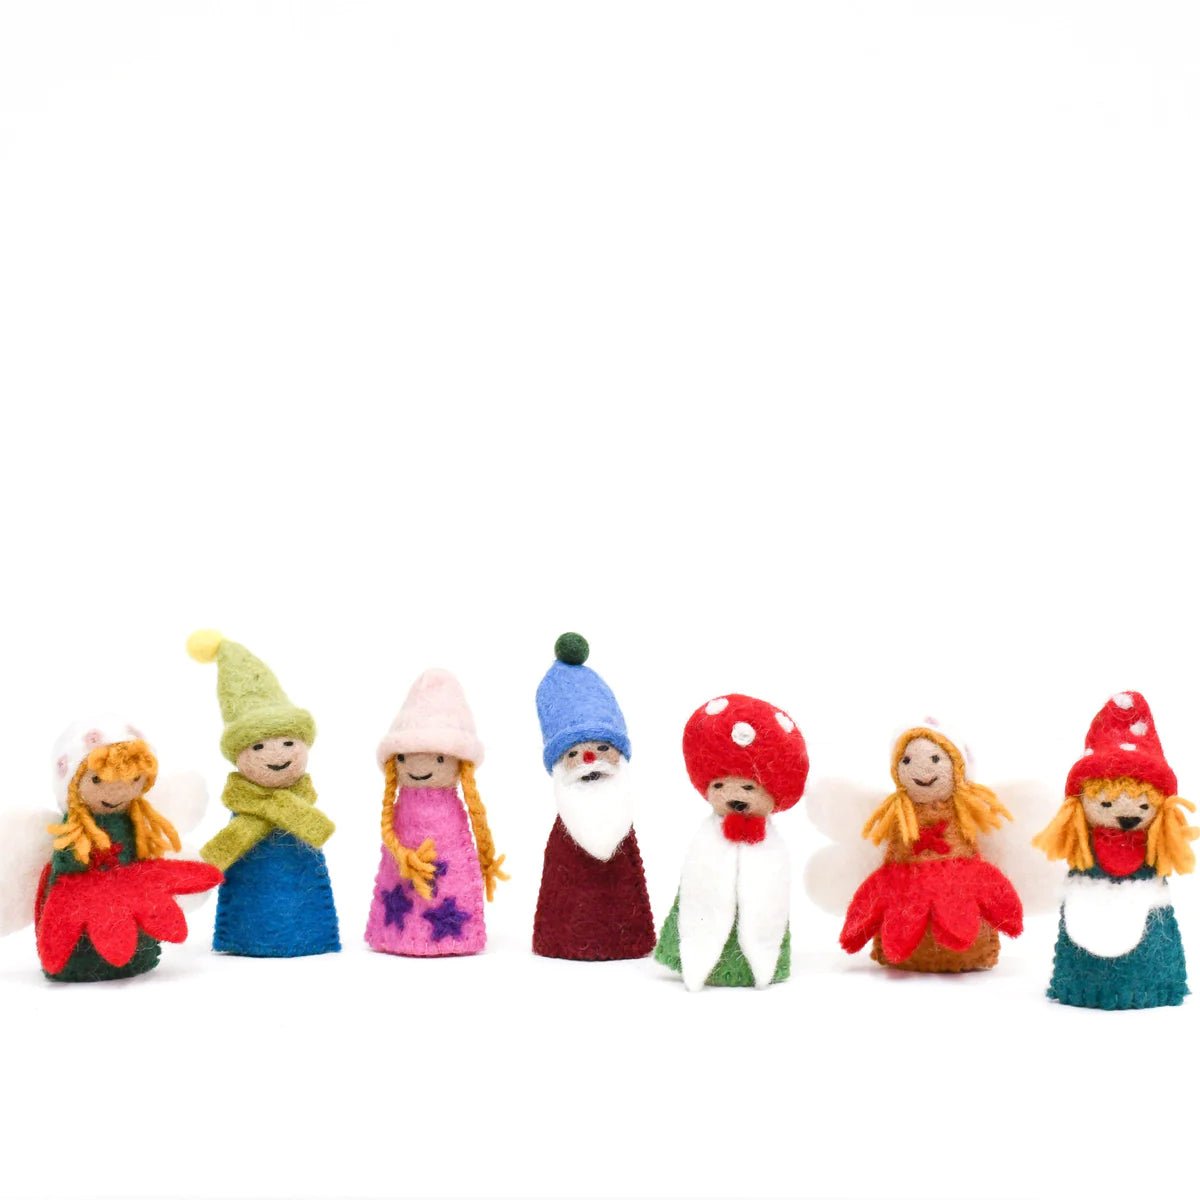 Finger puppet toys fairies and gnomes